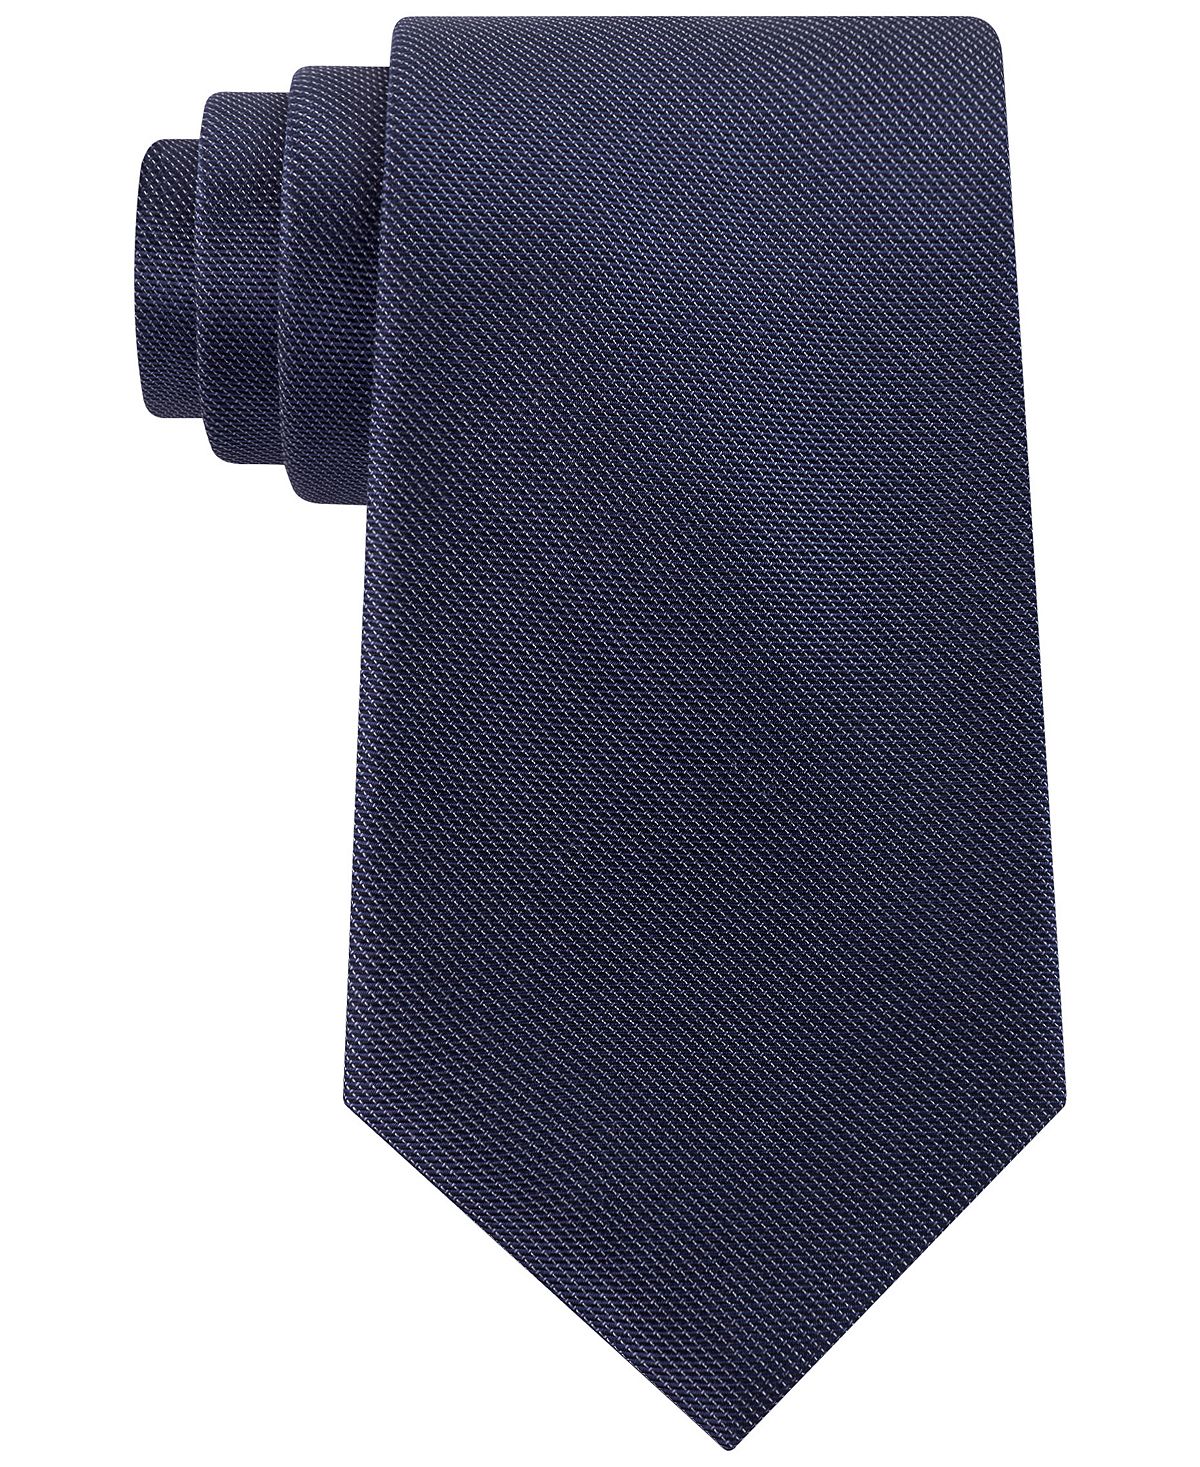 Kenneth Cole Reaction Pixel Solid Tie Navy